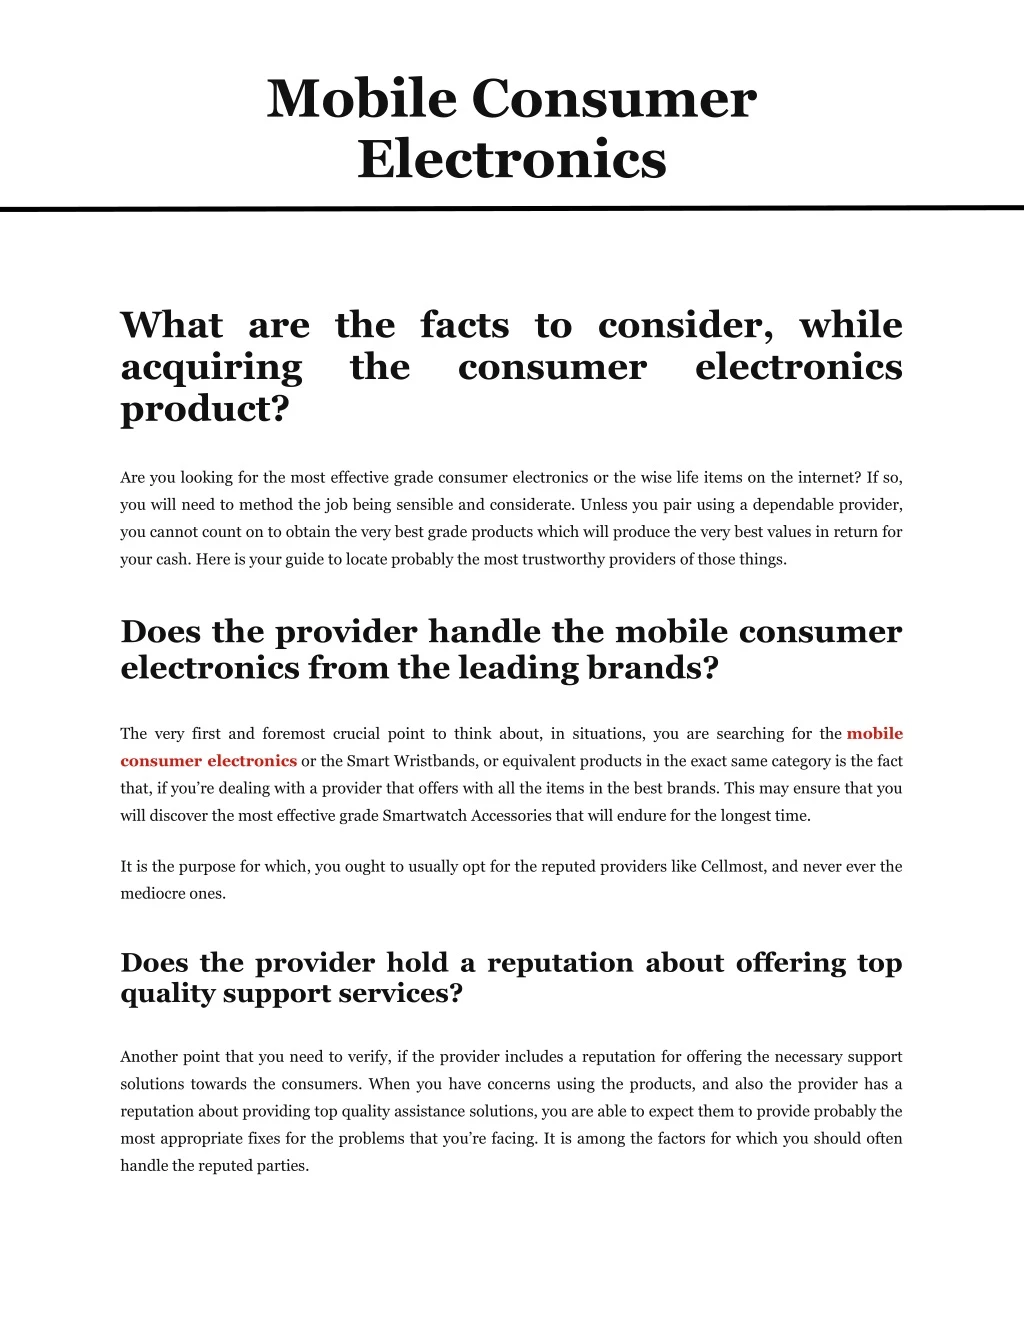 mobile consumer electronics what are the facts